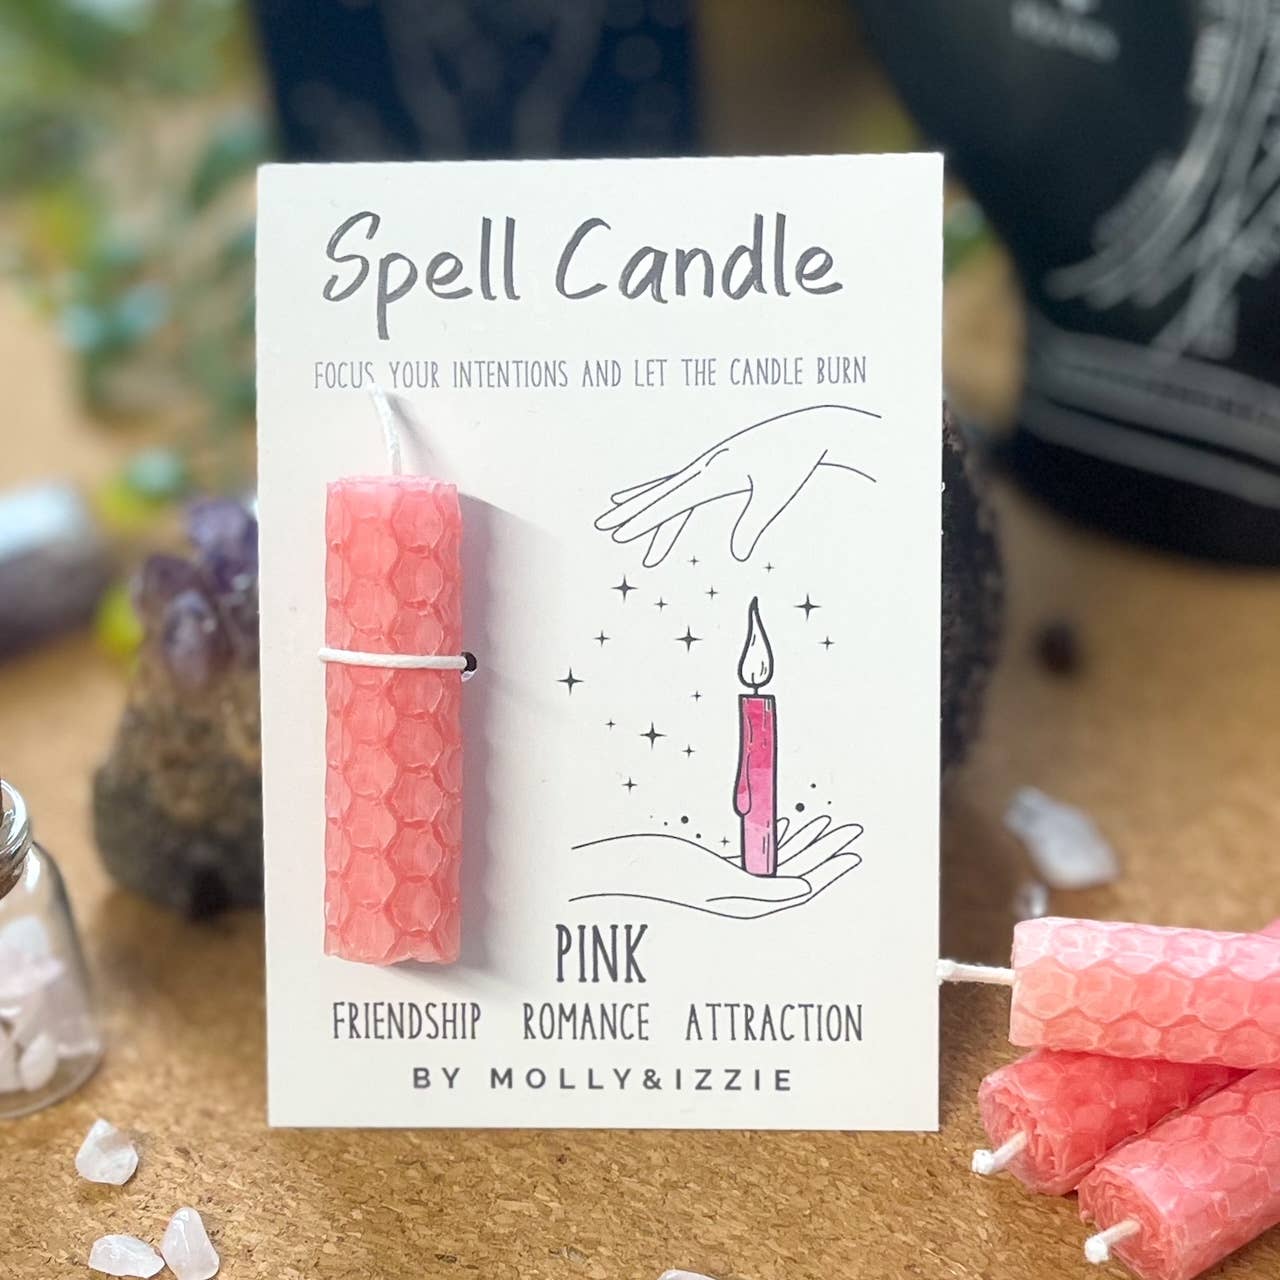 Spell Candle - Pink